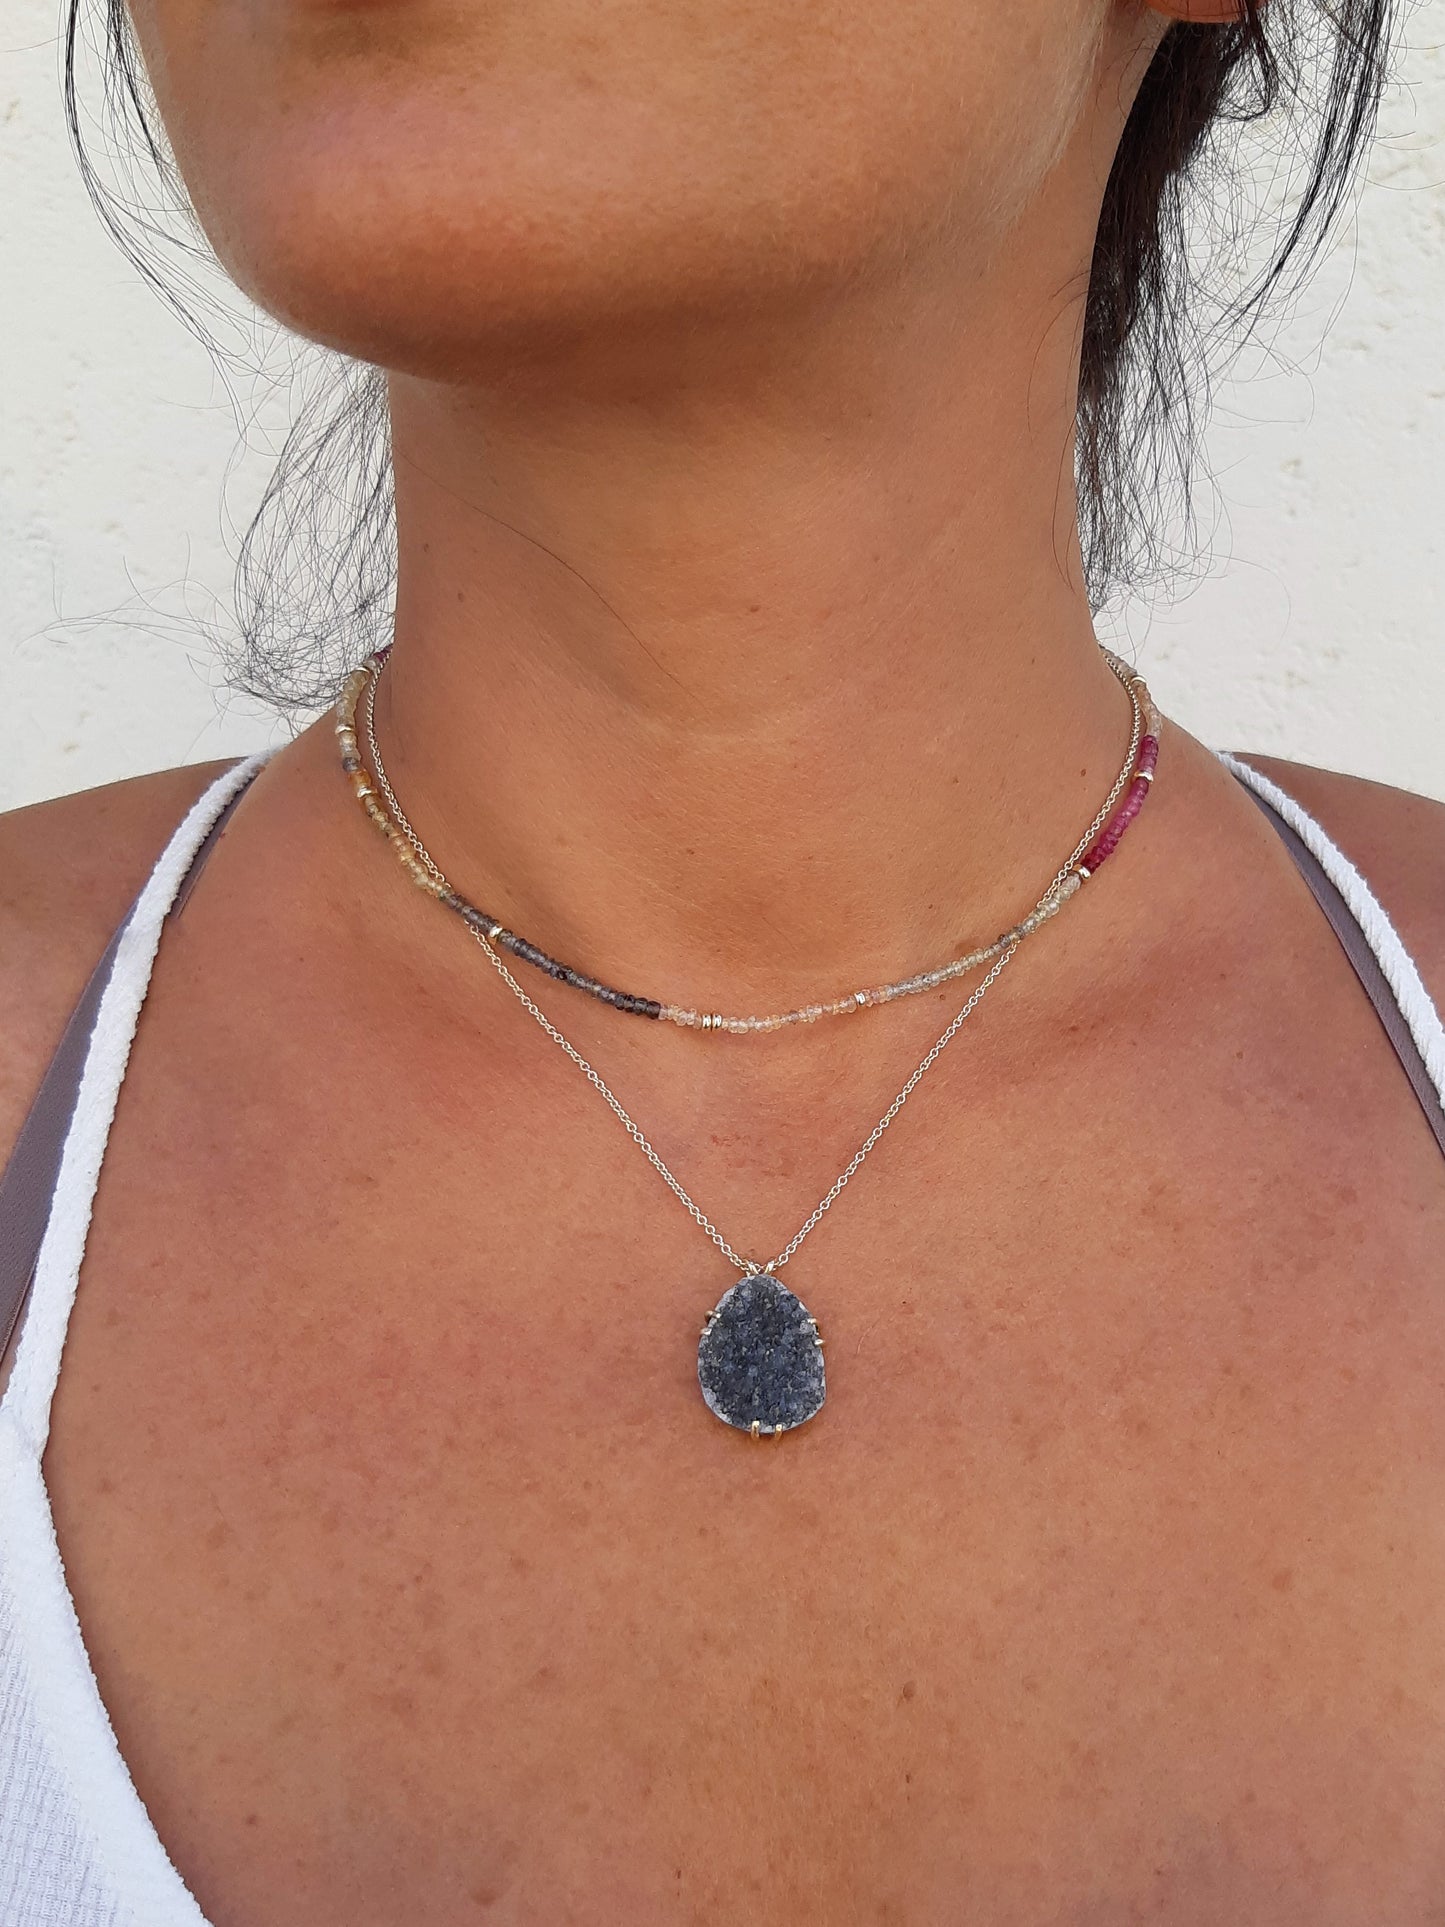 Agate Druzy Necklace in 14K